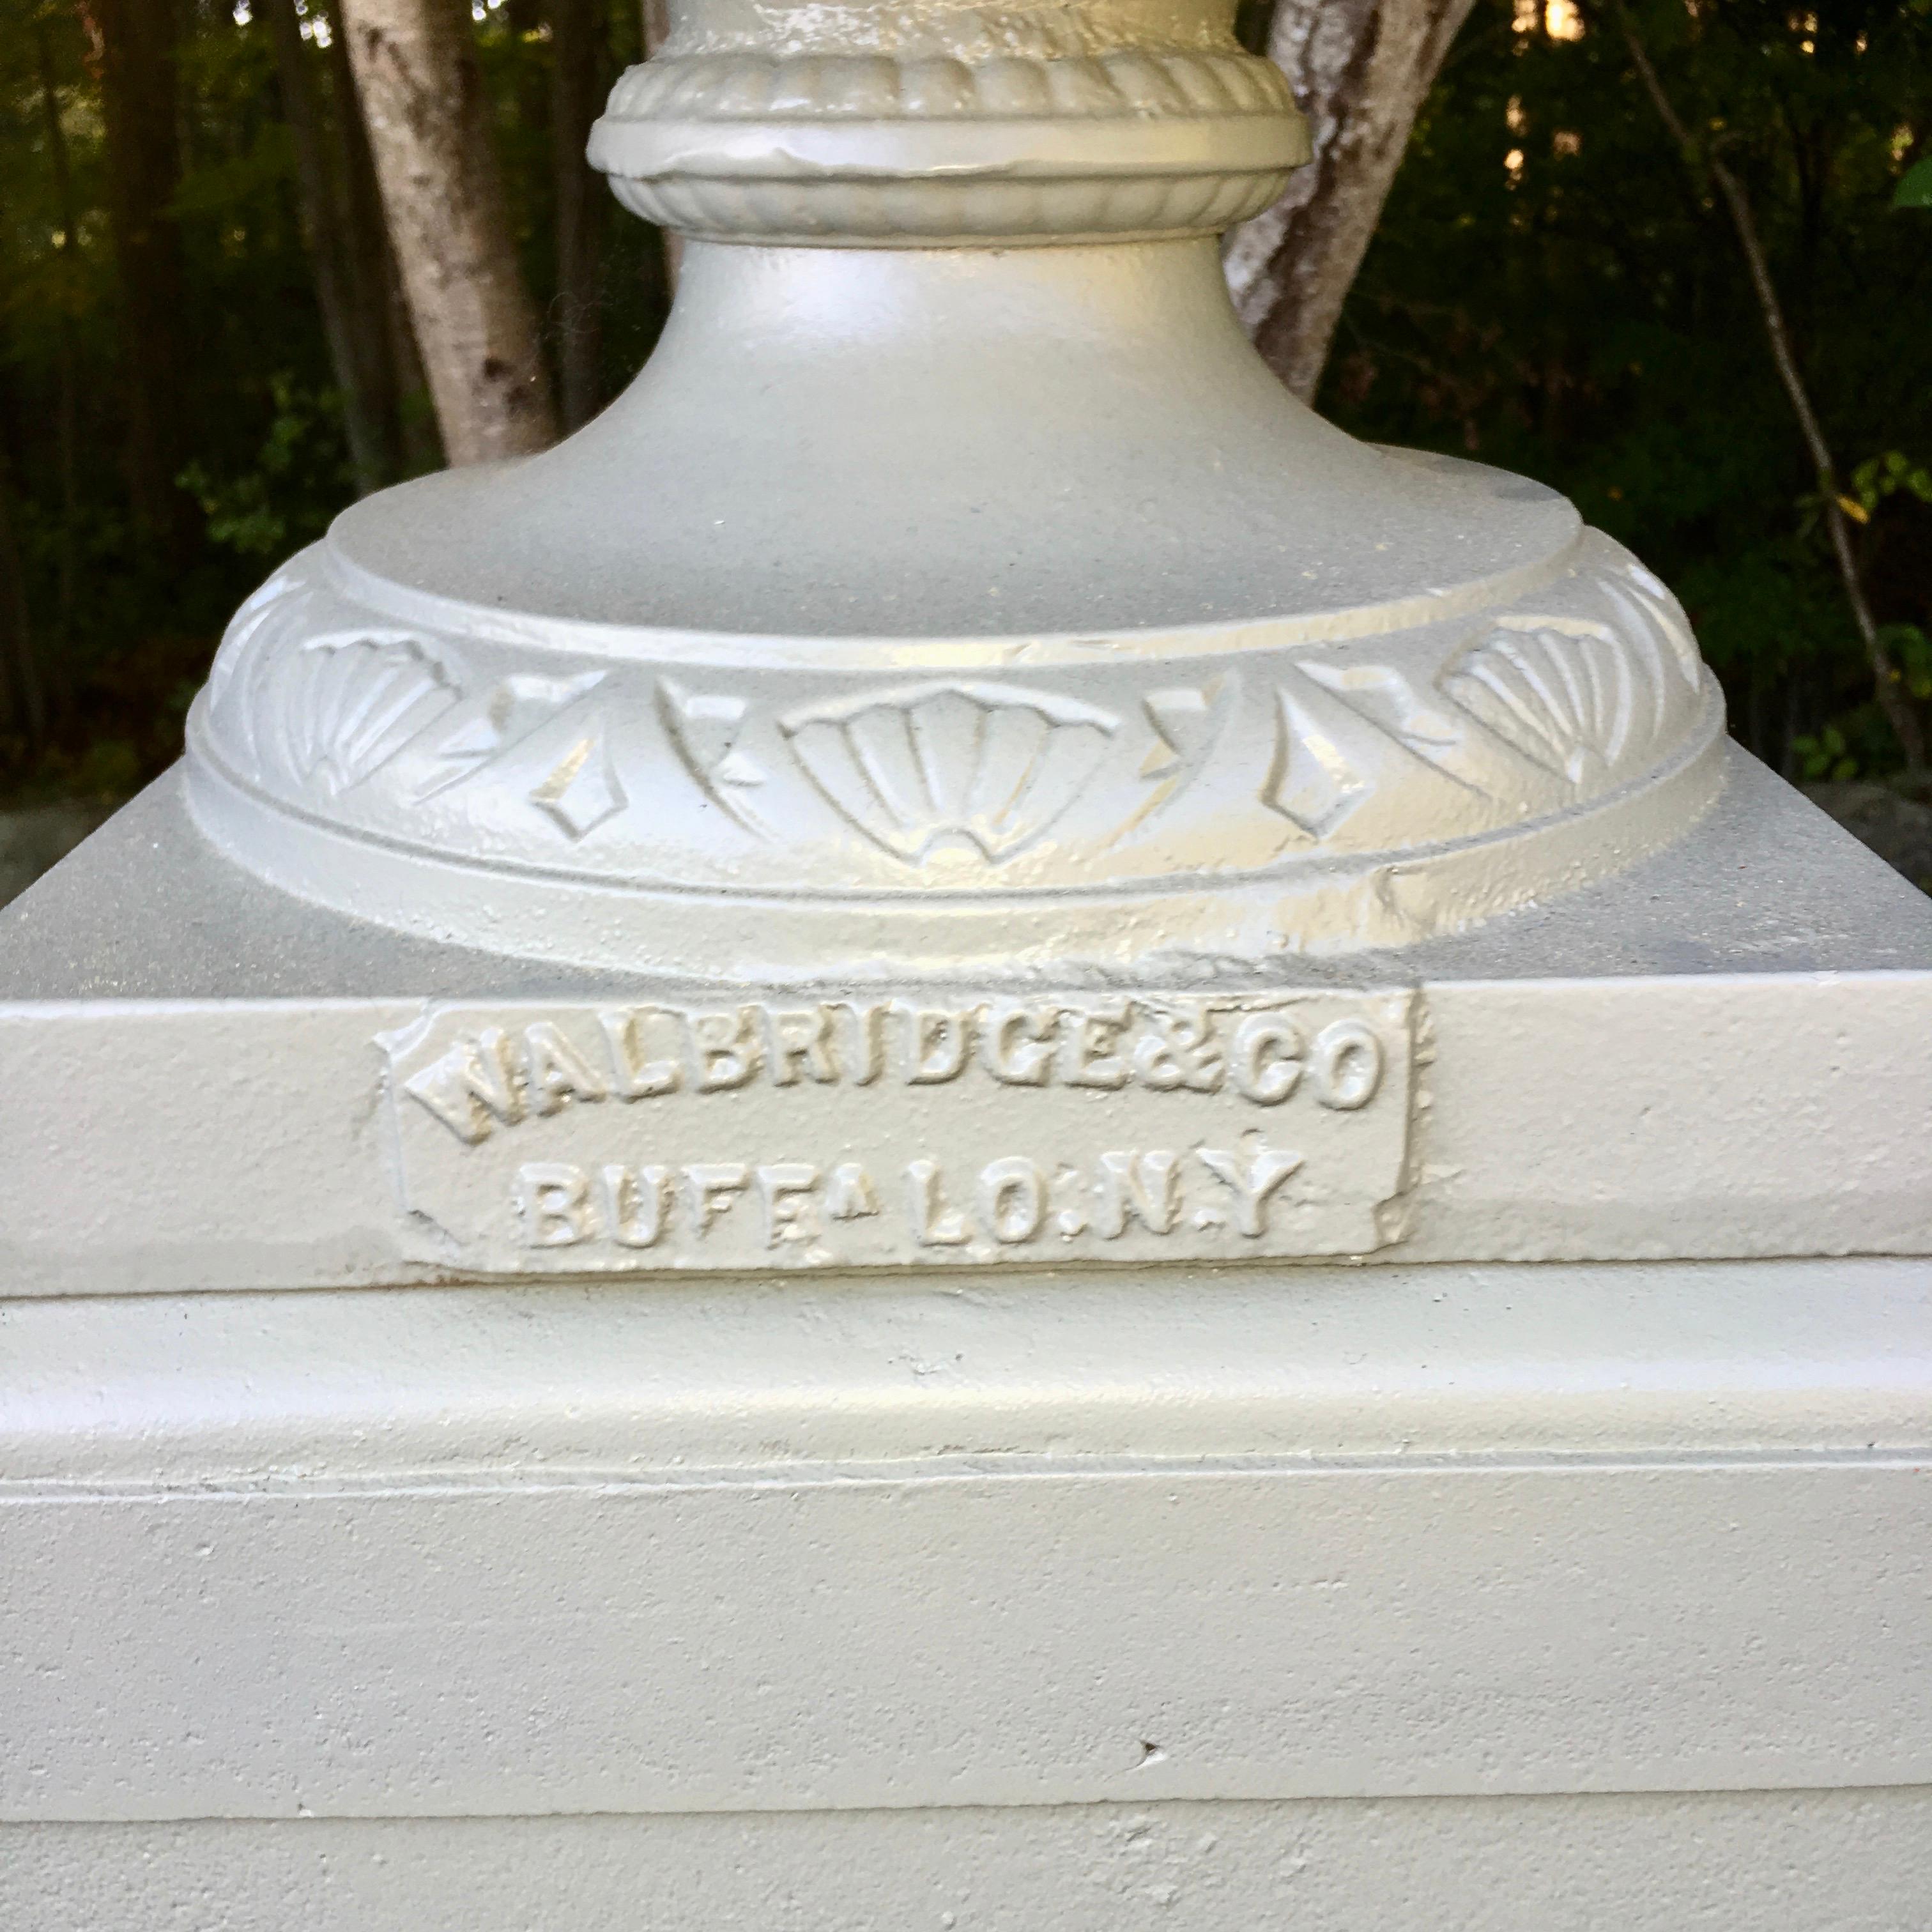 Large scale cast iron urn with handles on multi-tiered plinth base produced by the Walbridge Company of Buffalo, NY, circa 1900. See image 4 for detailed dimensions. Urn and plinths have been professionally sandblasted and powder coated a light